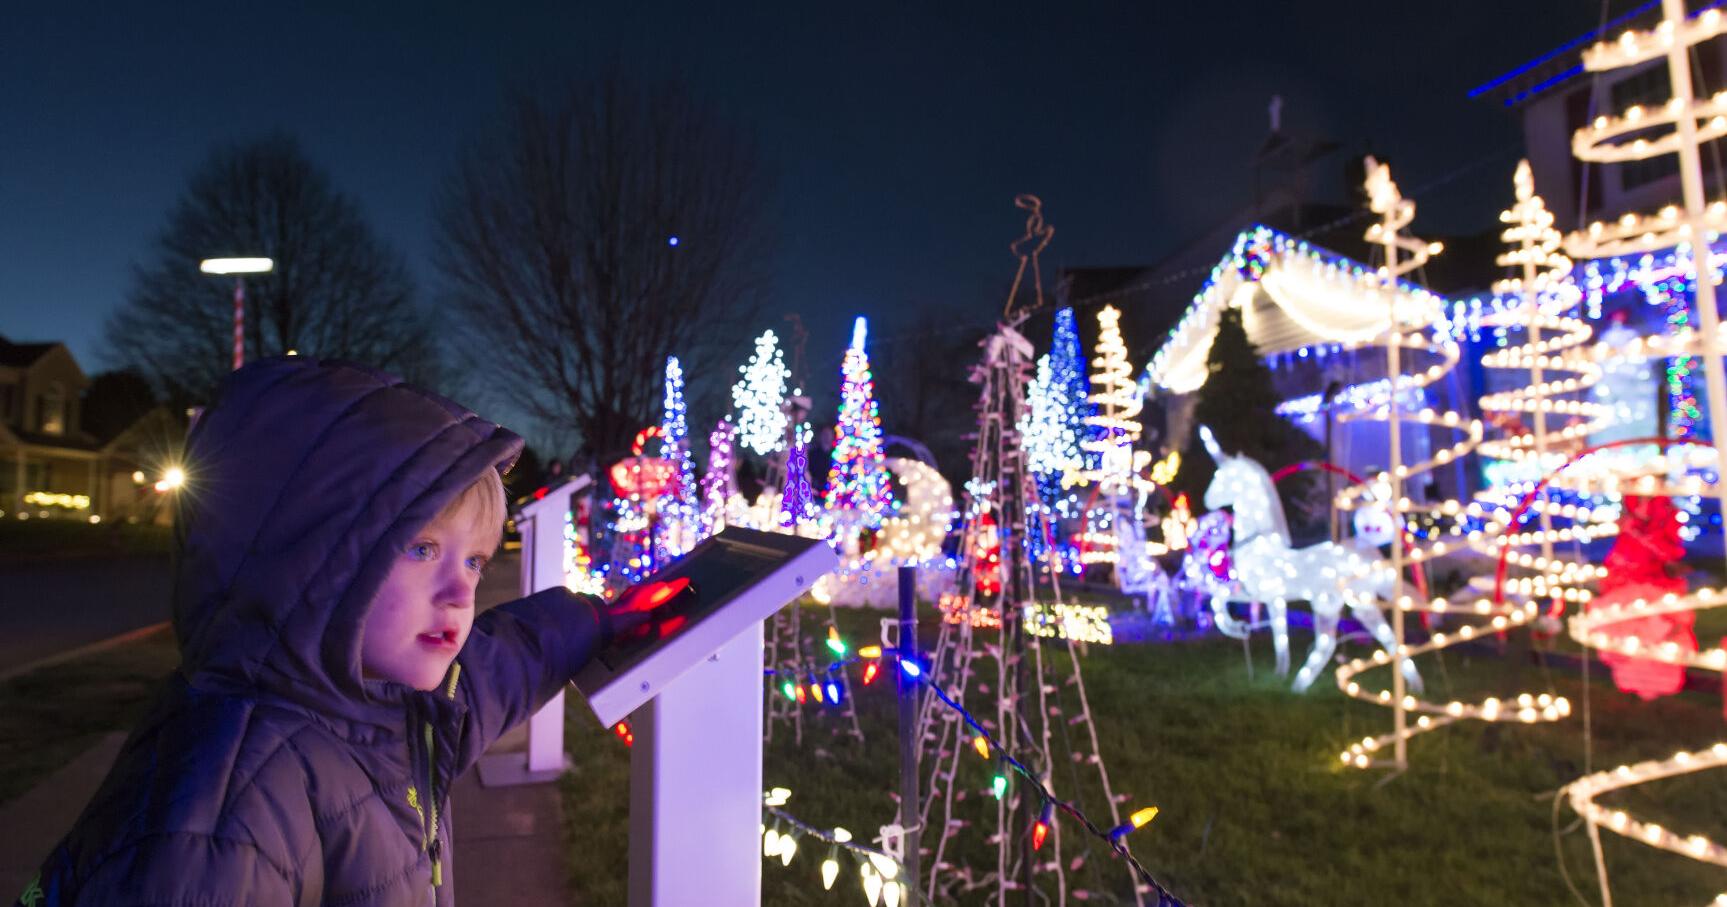 Show us your display for the 2022 Holiday Lights contest